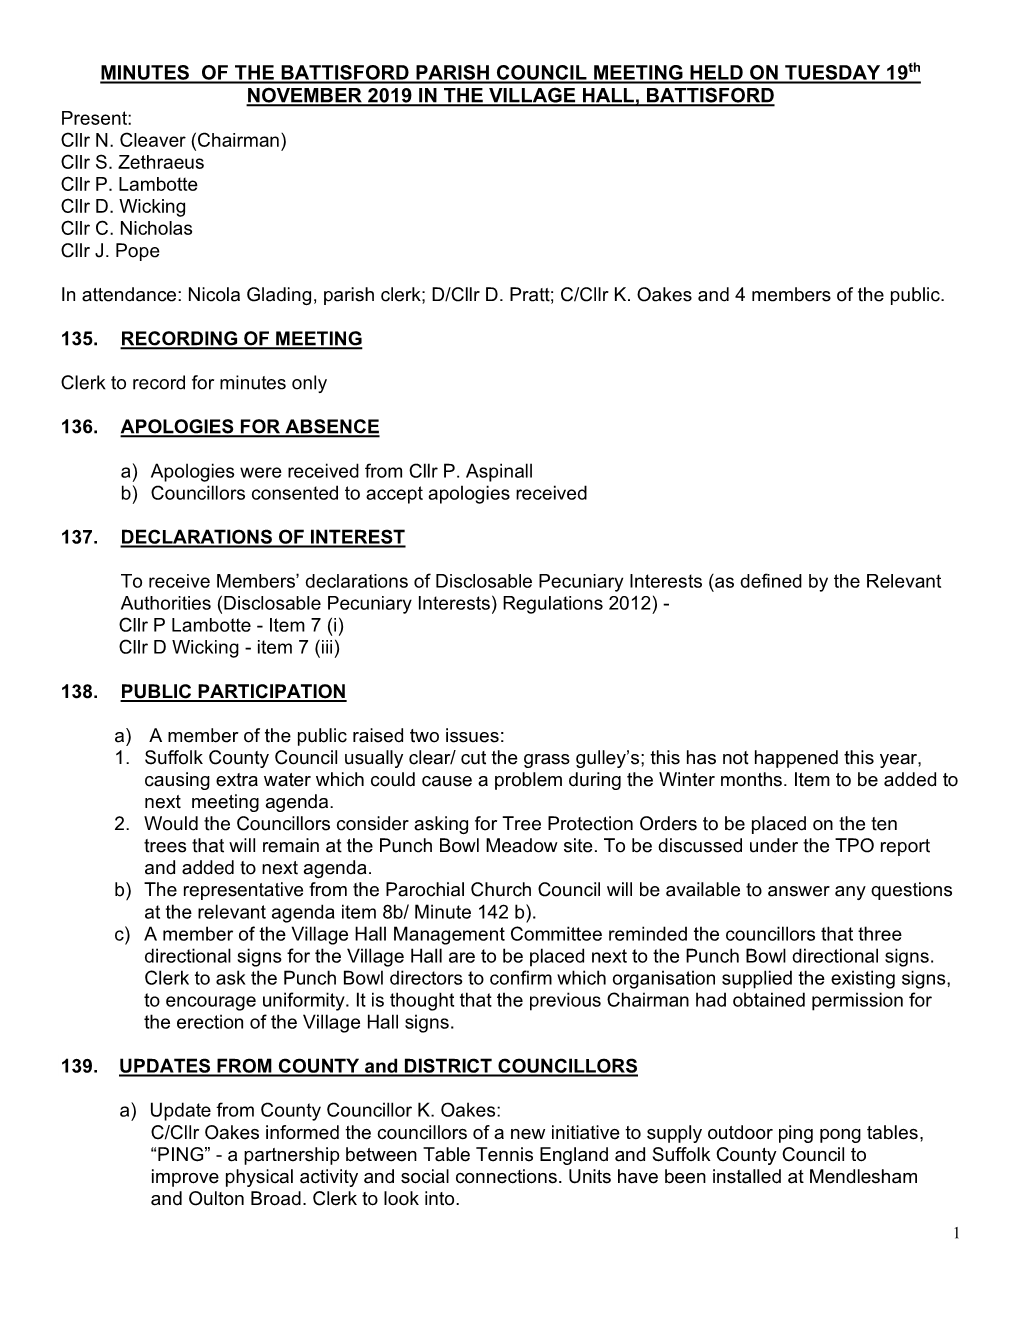 MINUTES of the BATTISFORD PARISH COUNCIL MEETING HELD on TUESDAY 19Th NOVEMBER 2019 in the VILLAGE HALL, BATTISFORD Present: Cllr N